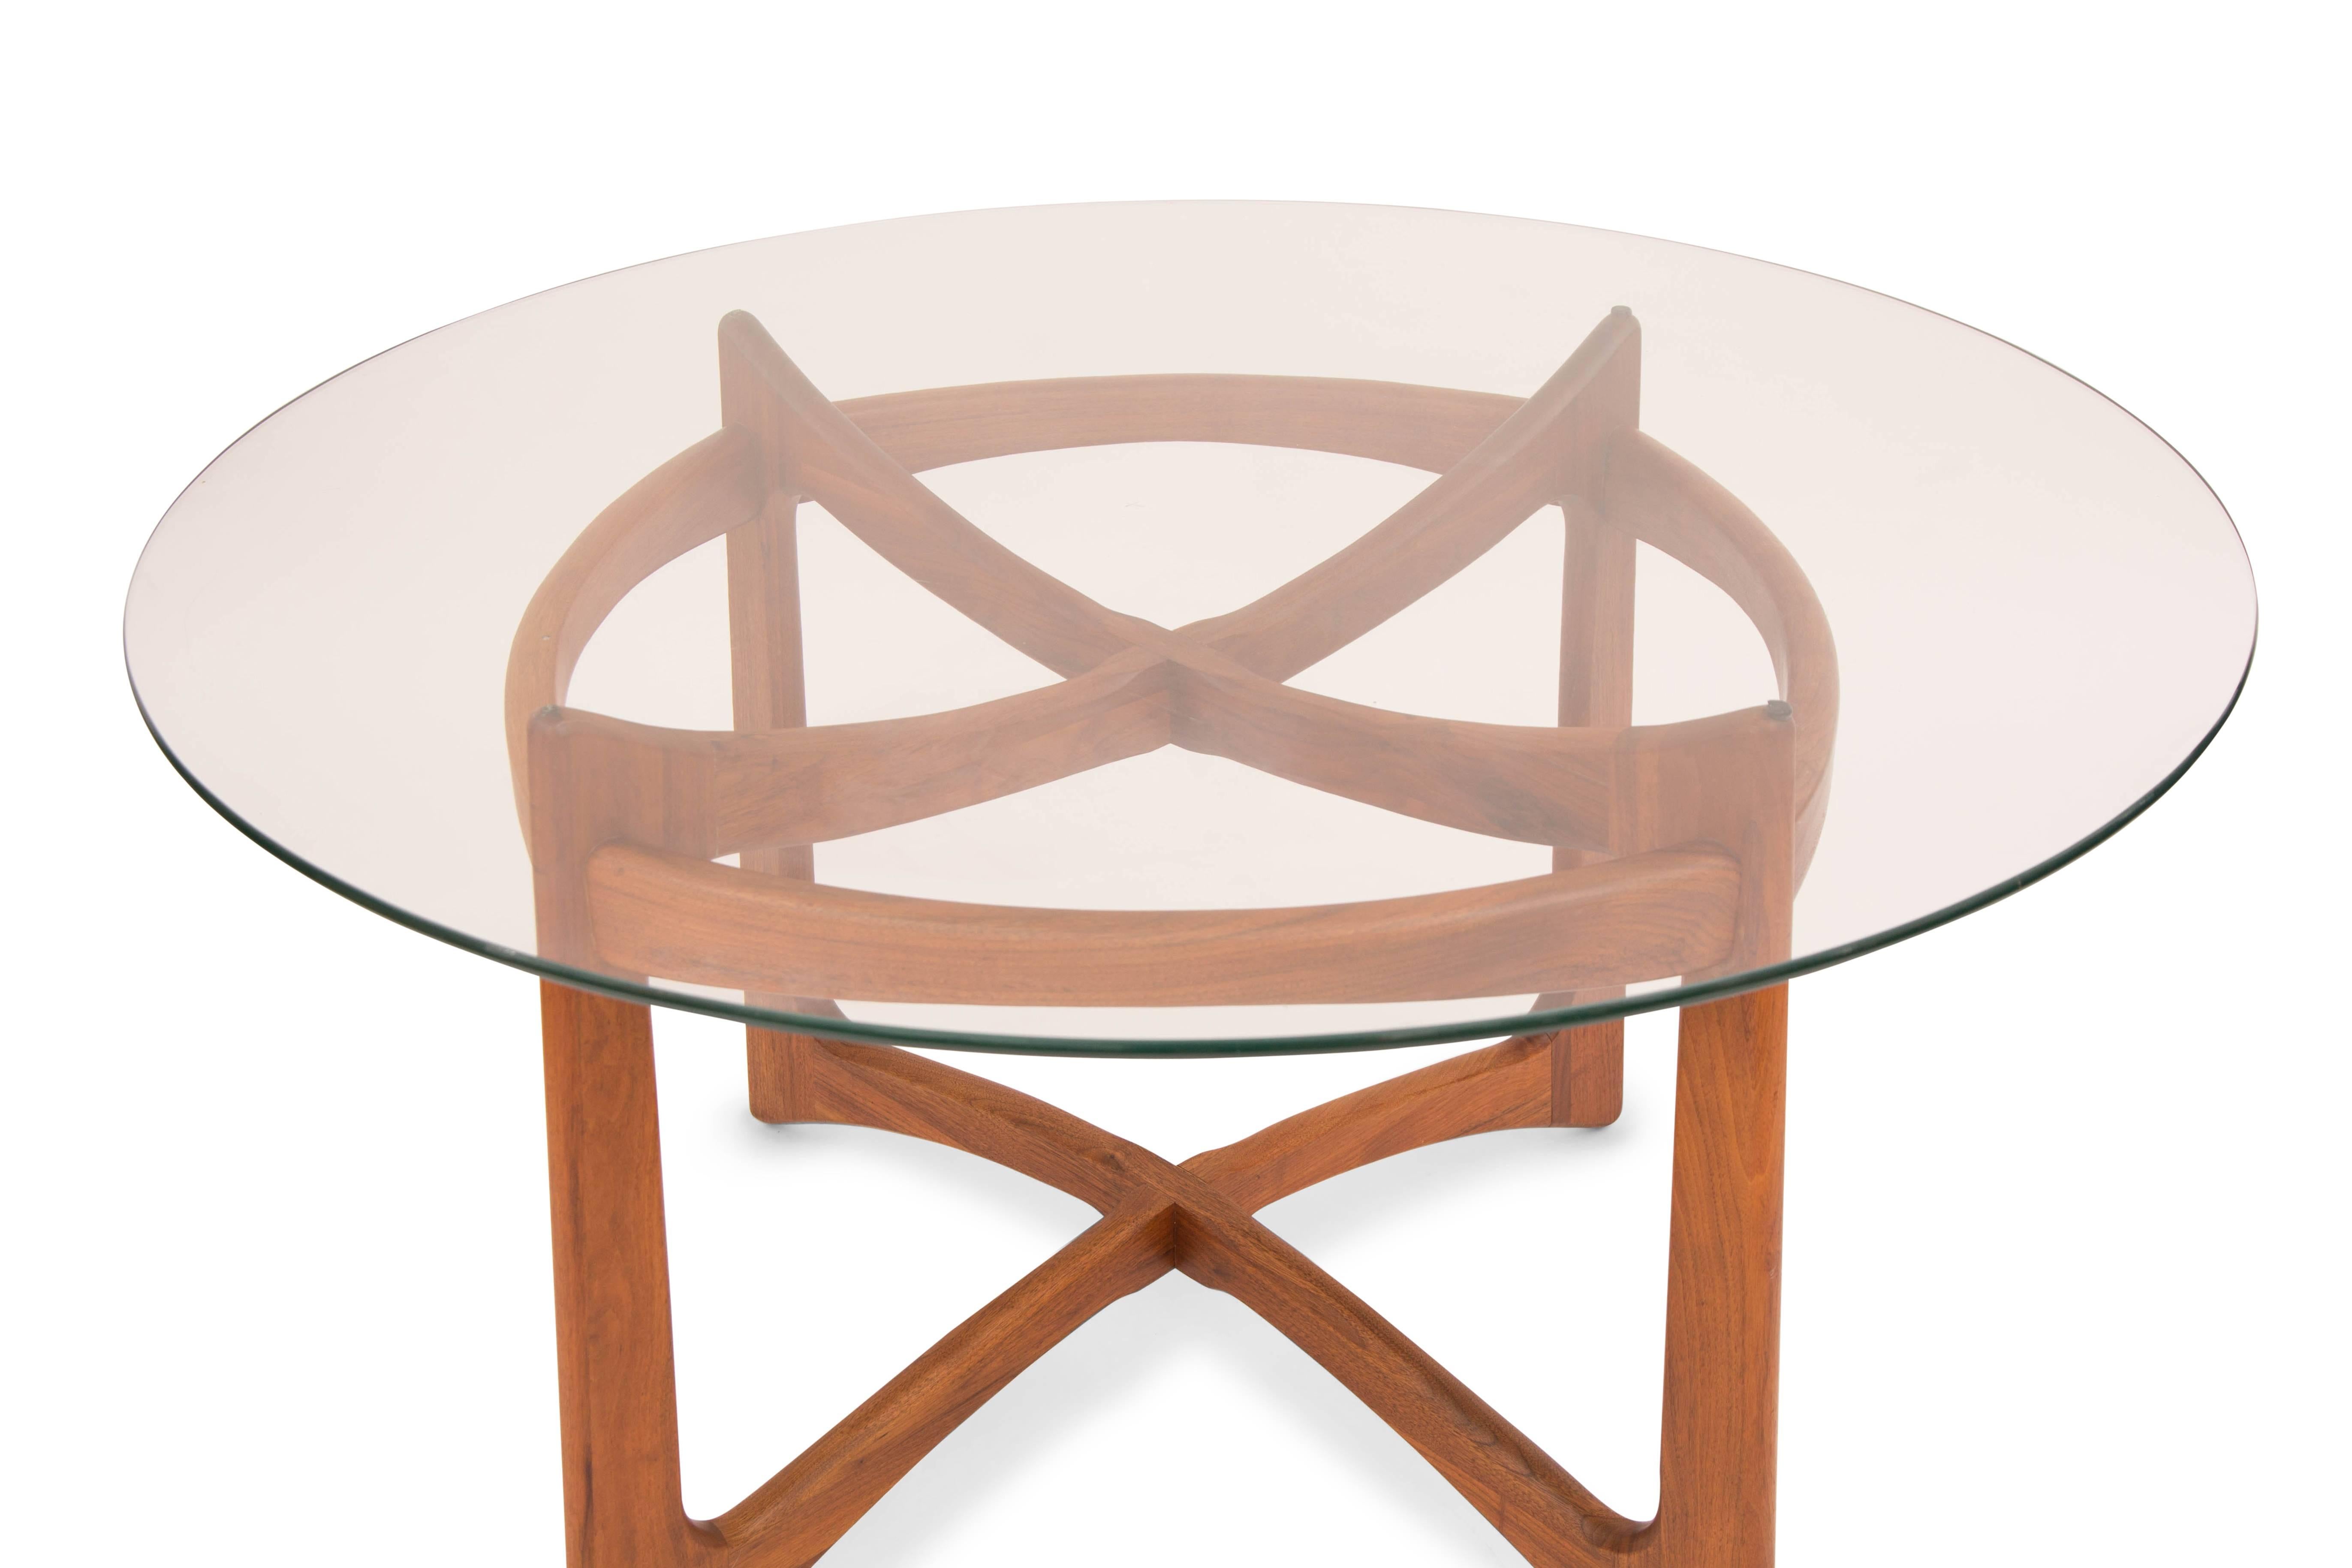 Adrian Pearsall for Craft Associates walnut dining table, circa late 1960s. This sculptural example has been newly oiled and is shown with a 48